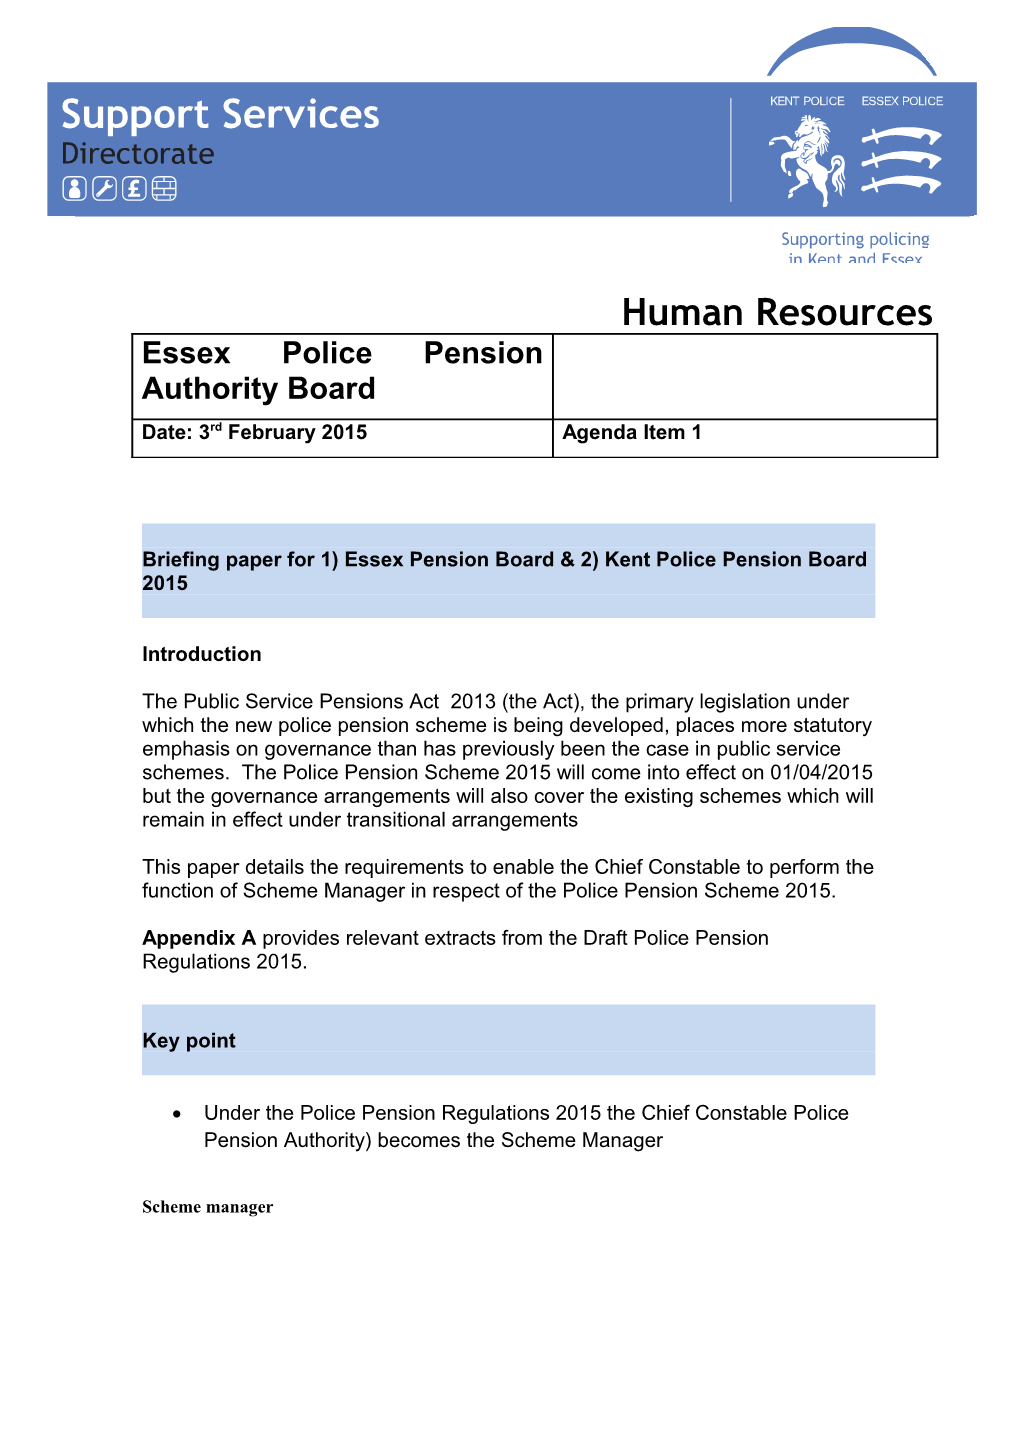 Briefing Paper for 1)Essex Pension Board & 2) Kent Police Pension Board 2015